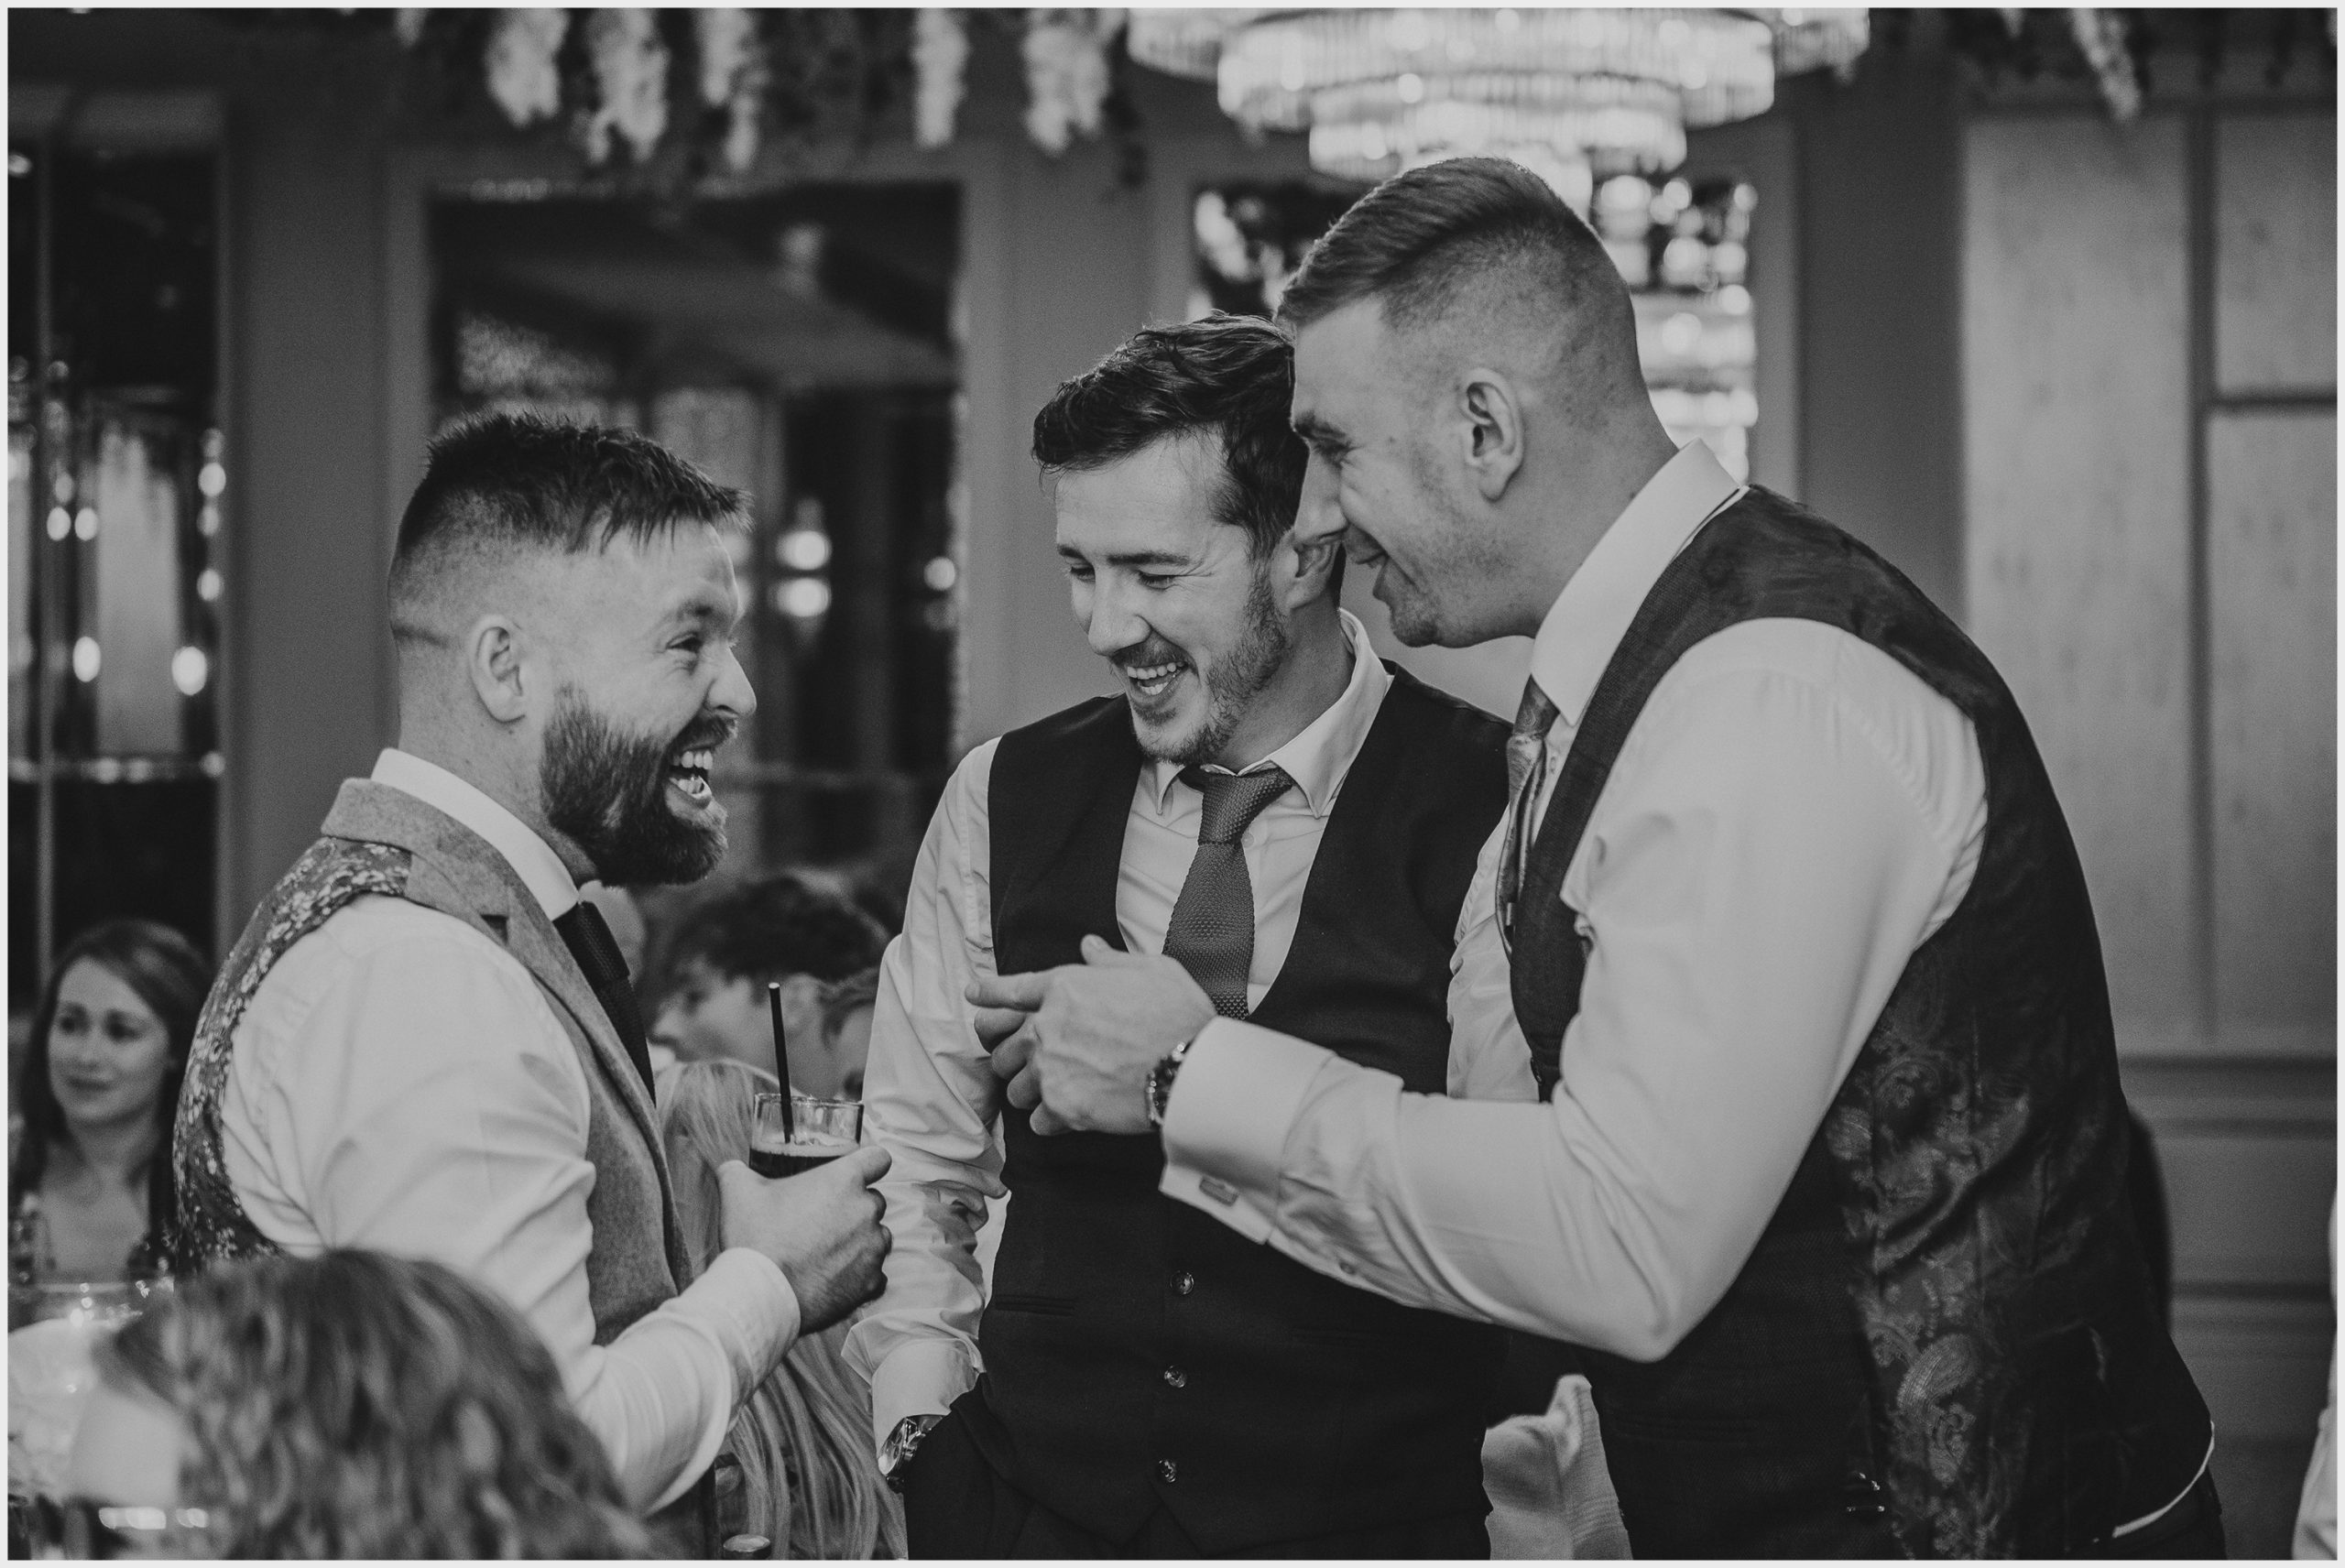 Guests joke and laugh during the wedding reception at The Grosvenor Pulford Hotel and Spa.  Image taken by north Wales based wedding photographer Helena Jayne Photography